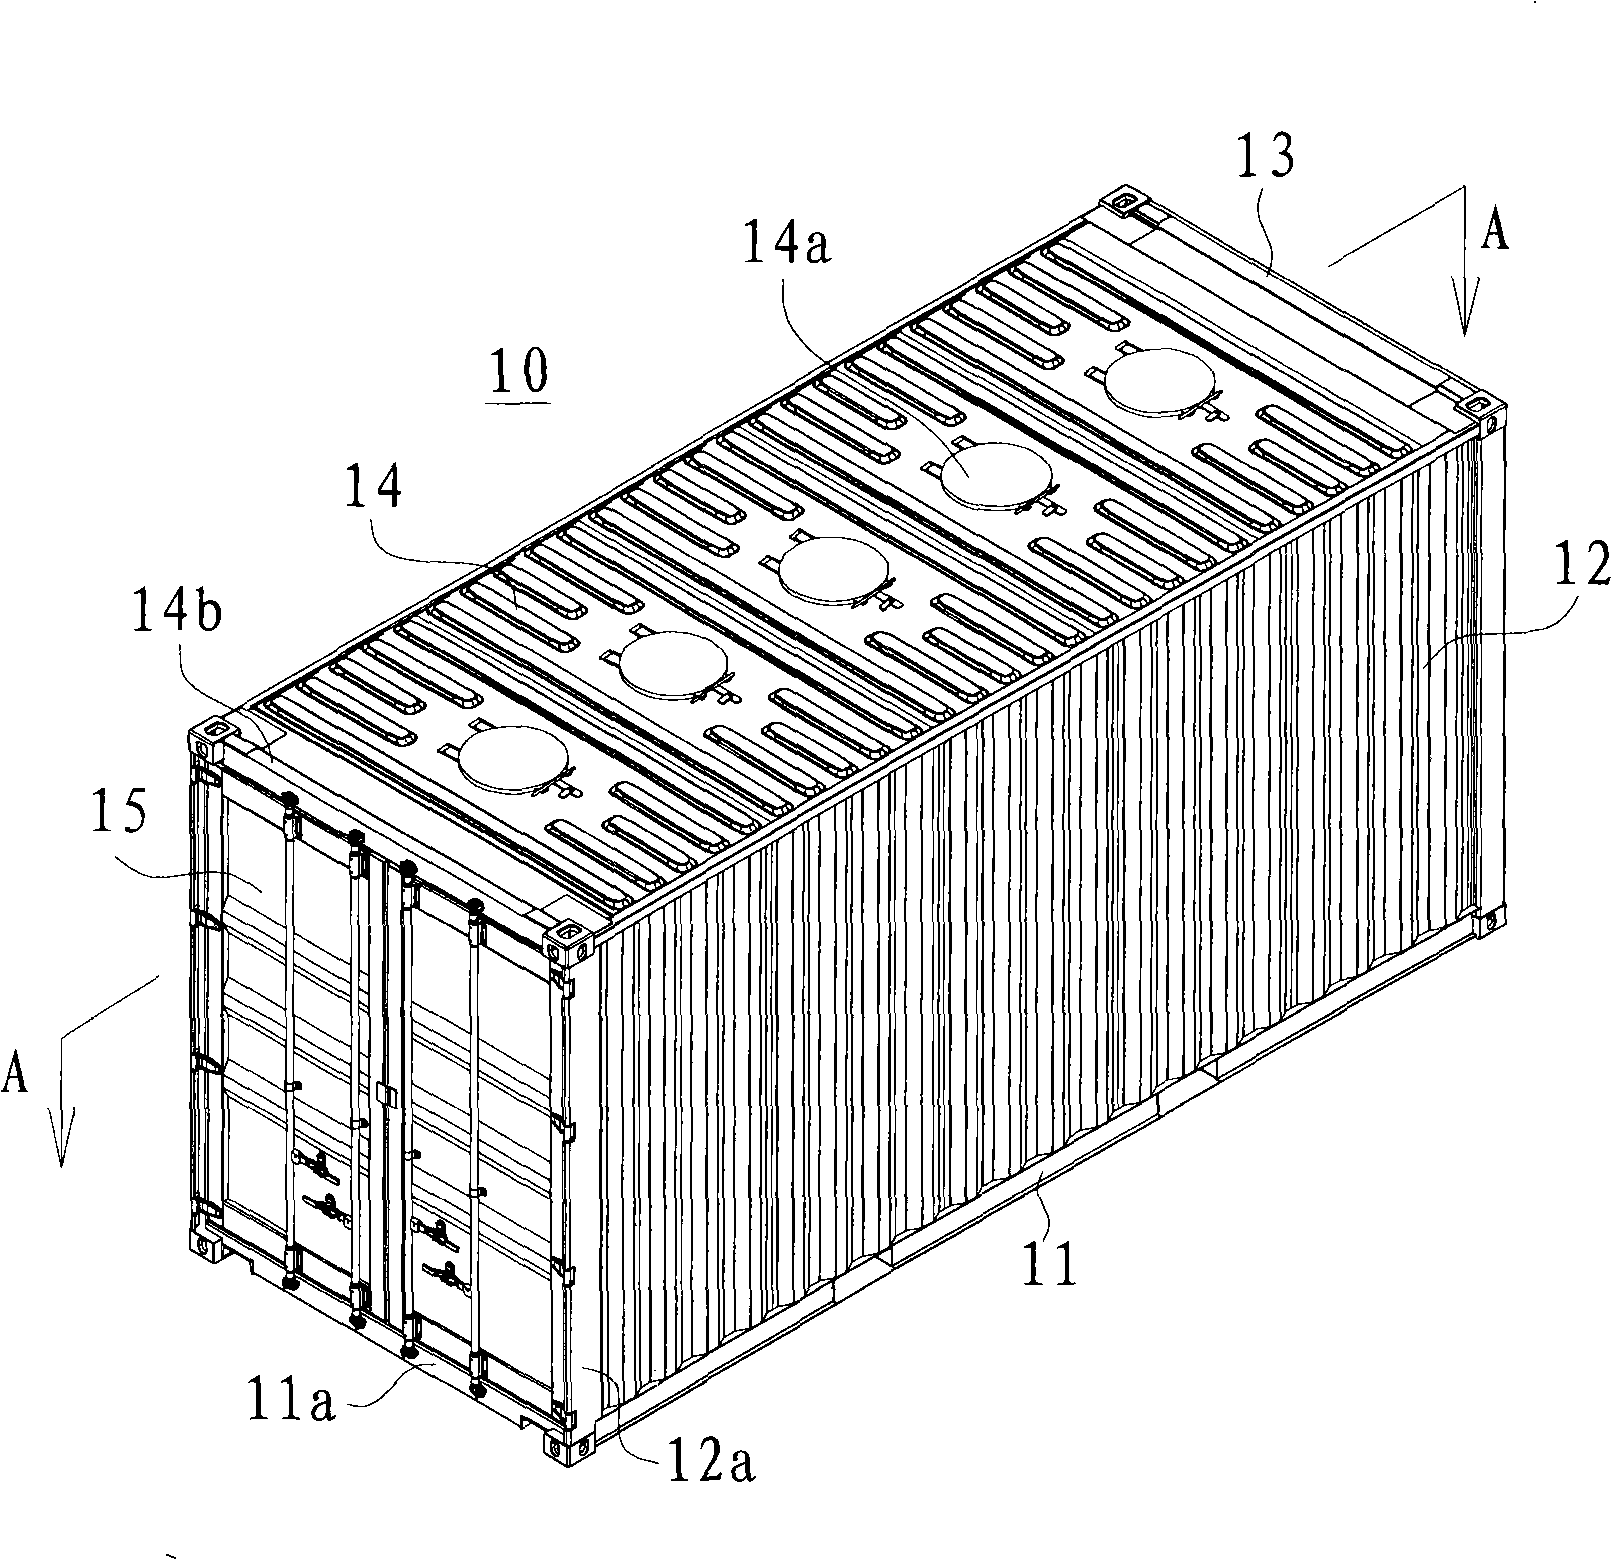 Dry and bulk cargo container and enhanced mechanism for gate end sealing